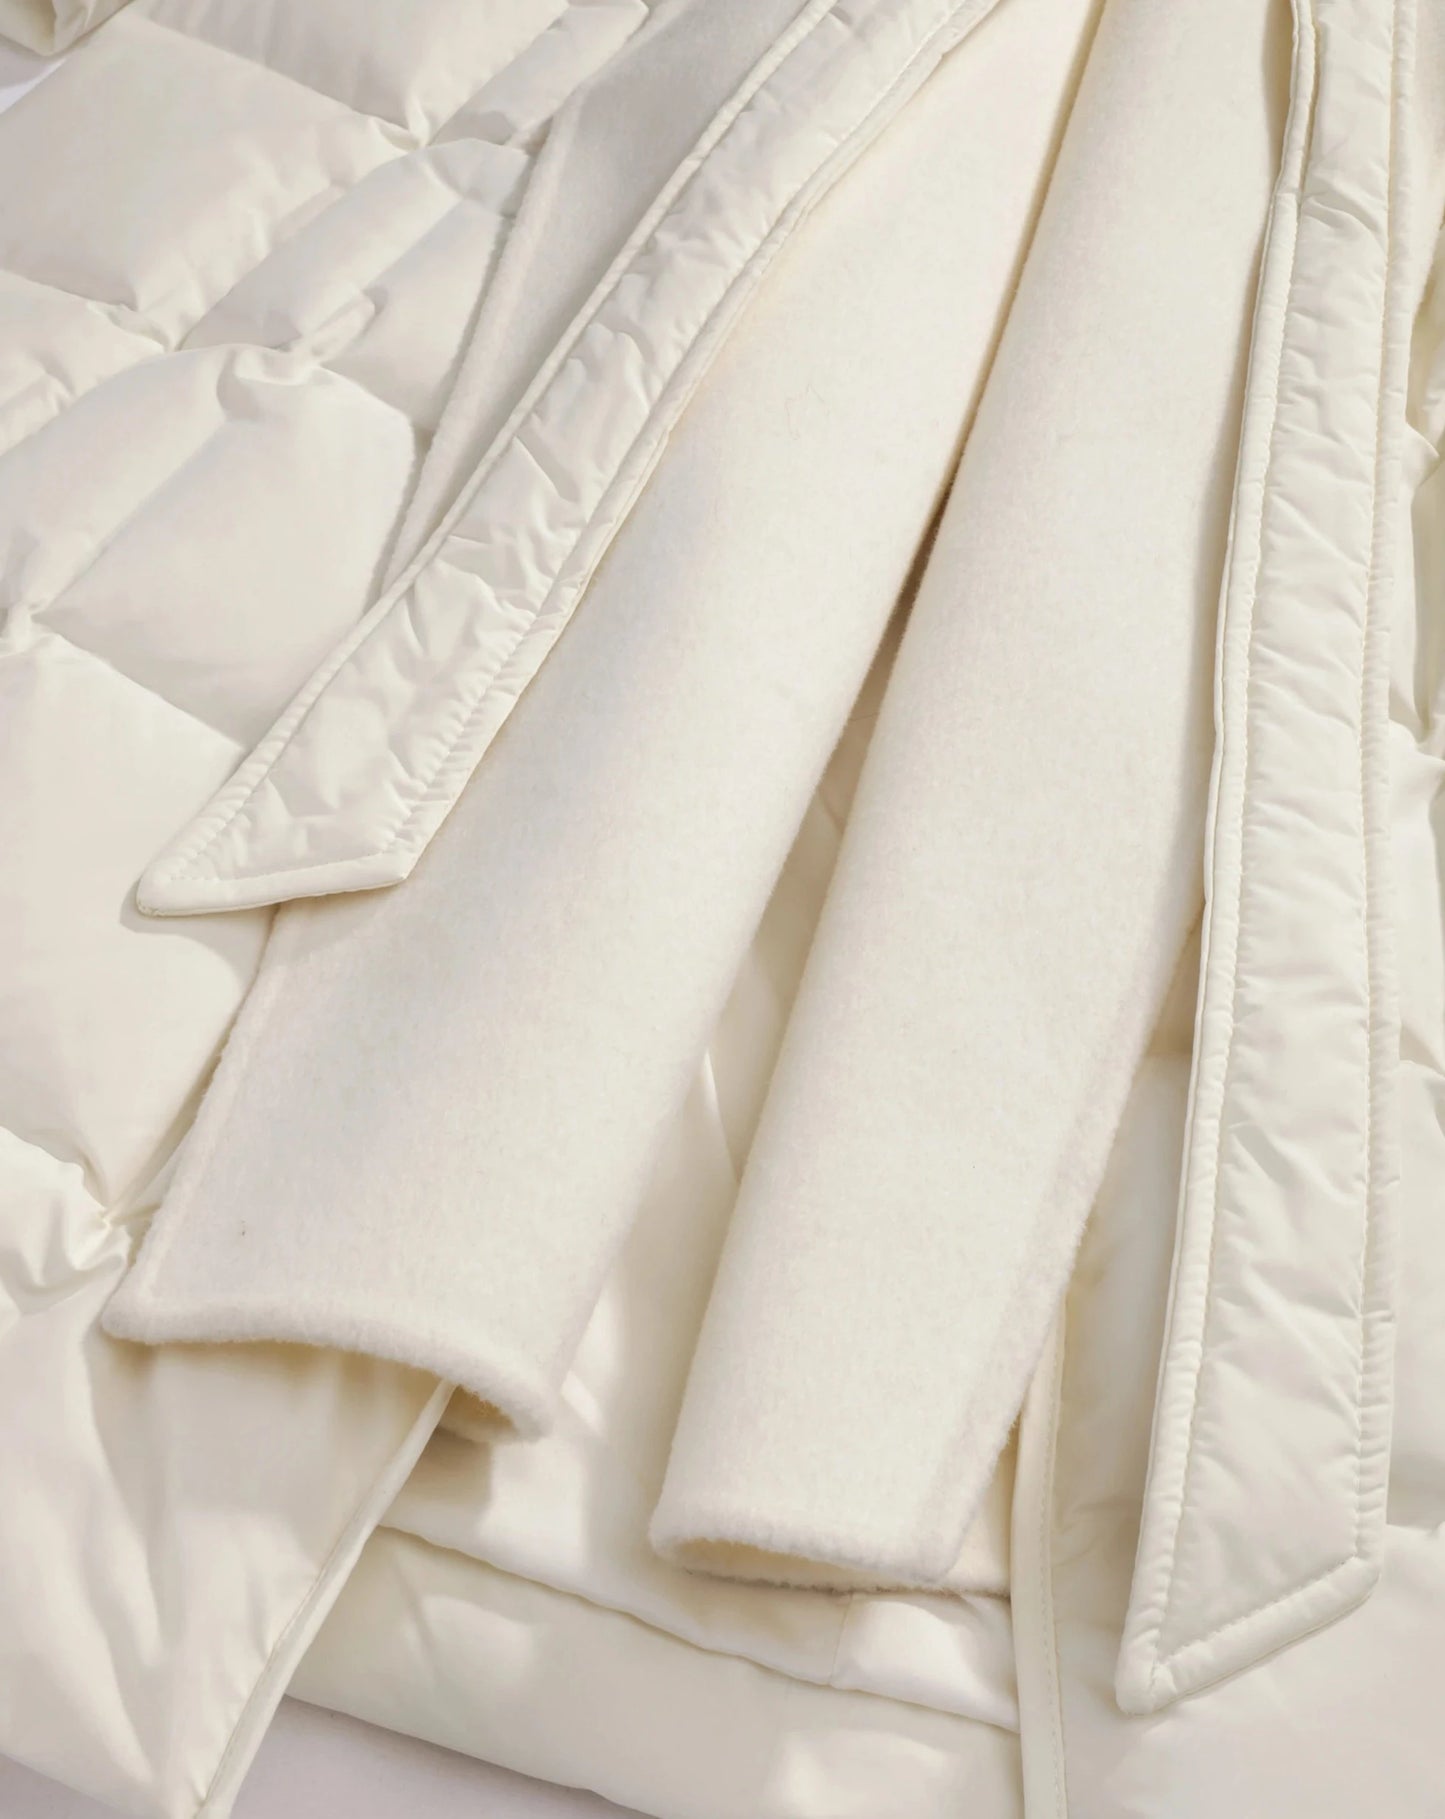 Women's white maxi belted puffer coat